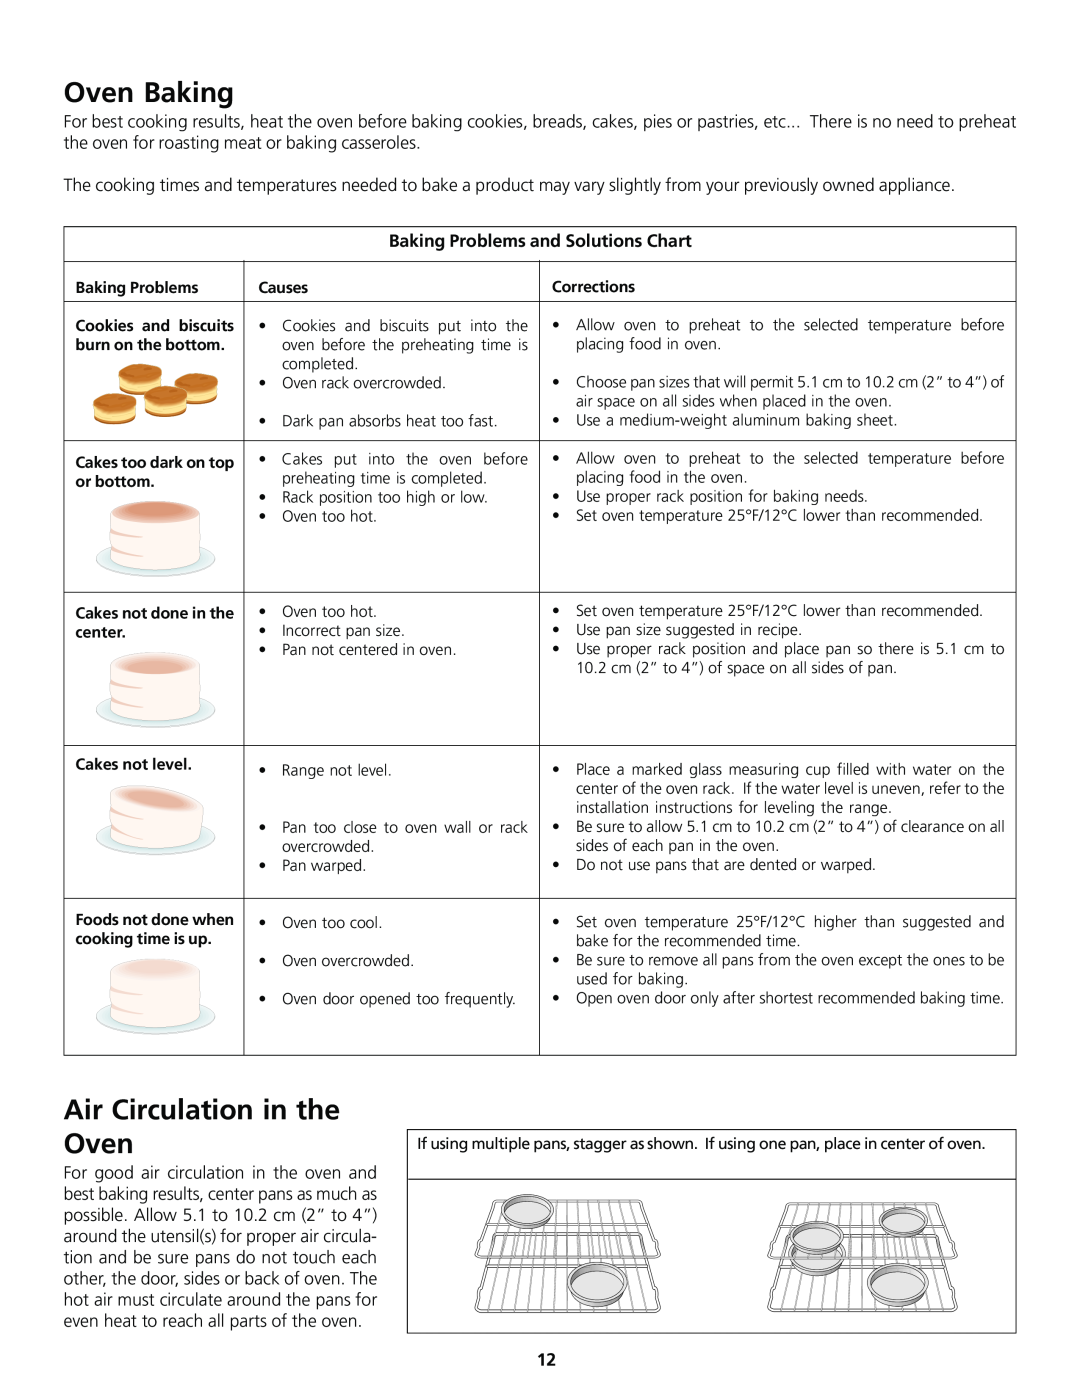 Frigidaire 318200830 Oven Baking, Air Circulation in the Oven, Baking Problems and Solutions Chart 